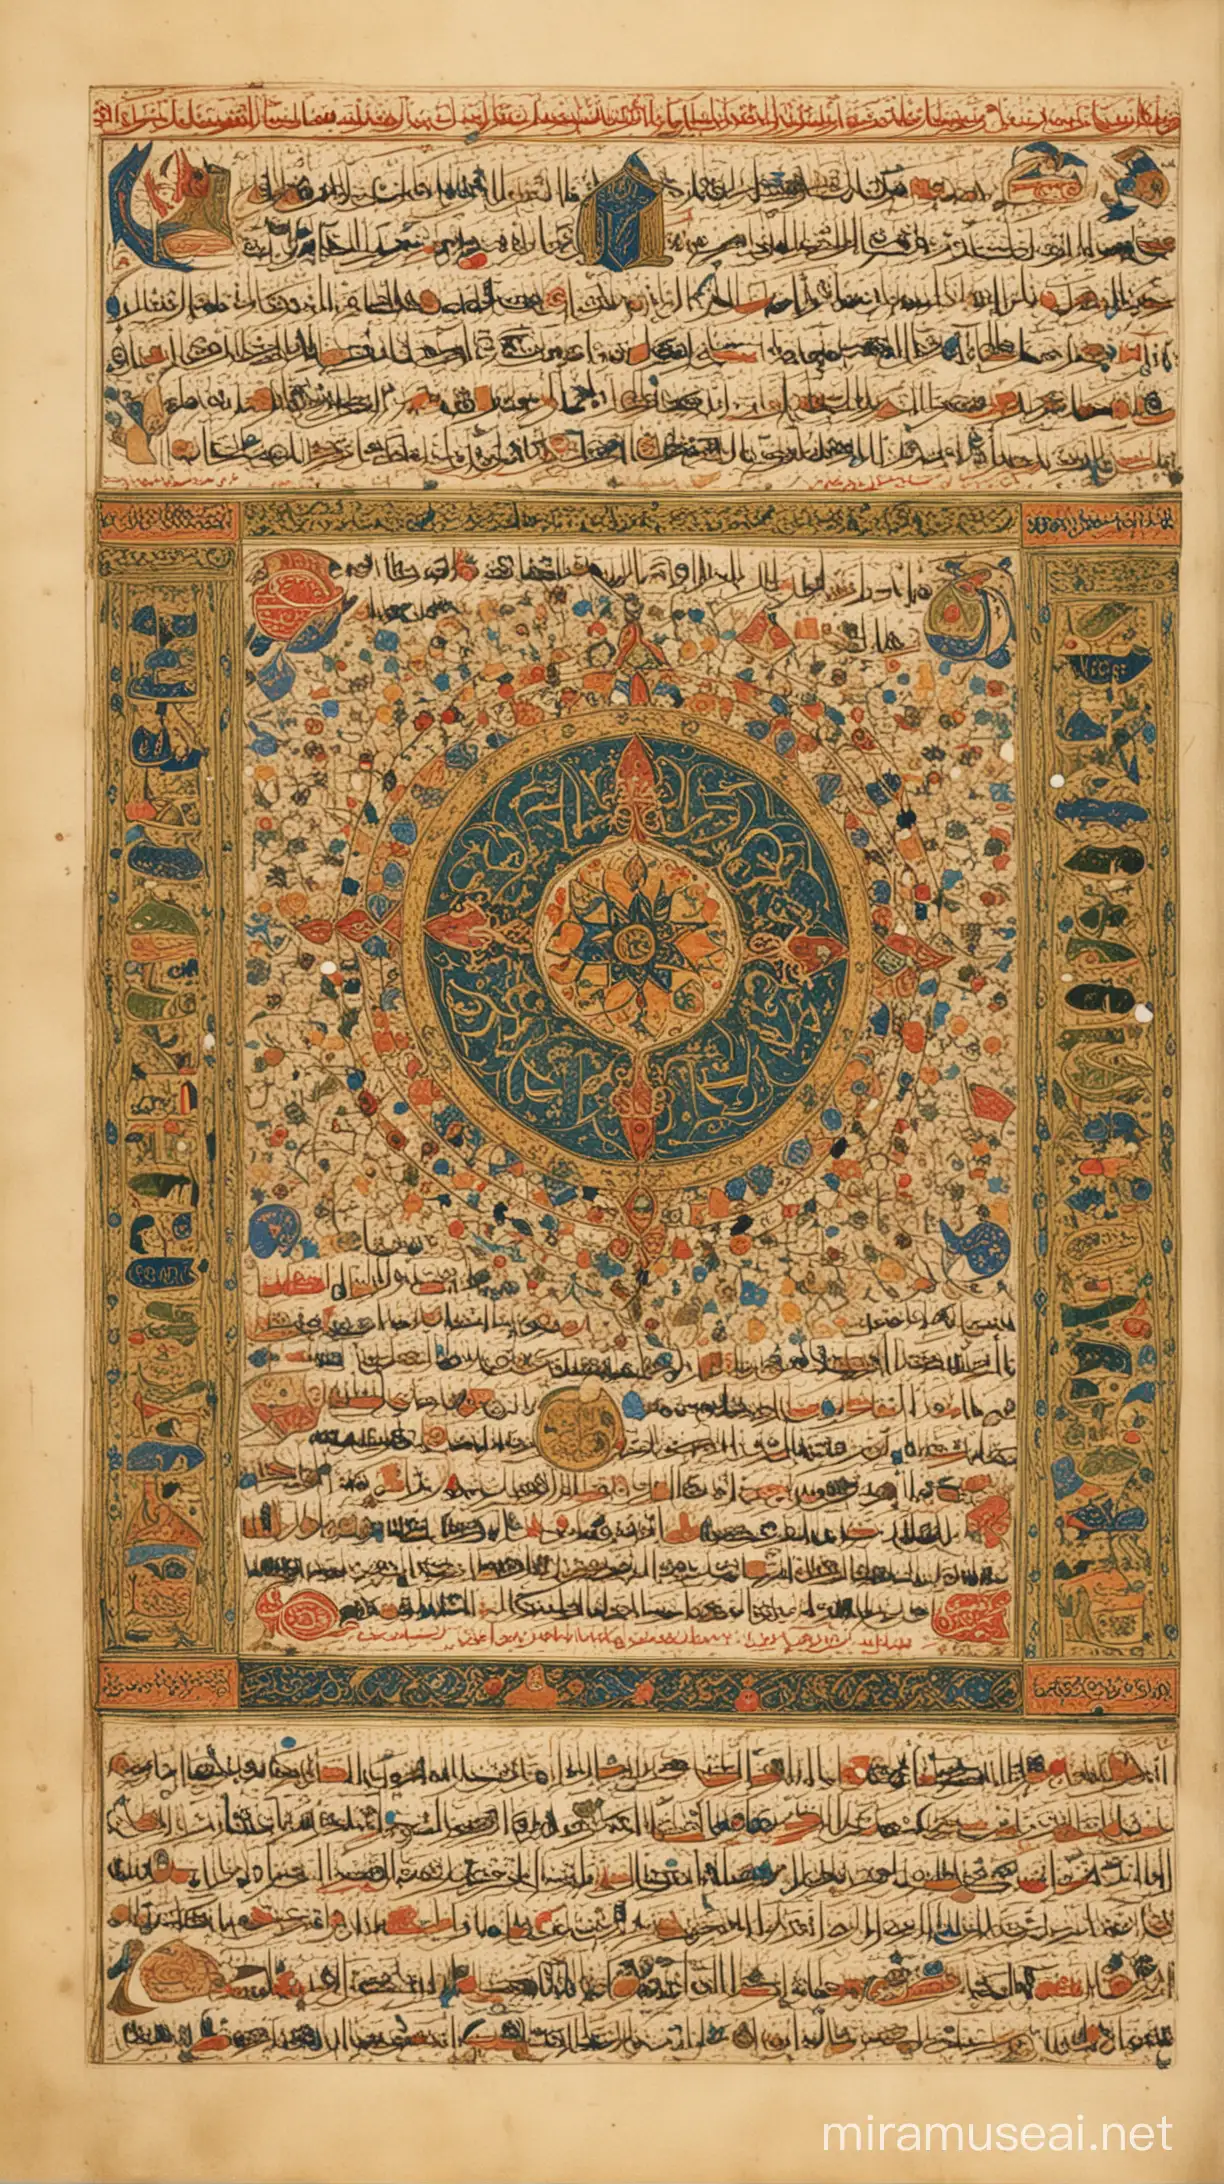 Medieval Islamic Manuscript with Intricate Illustrations